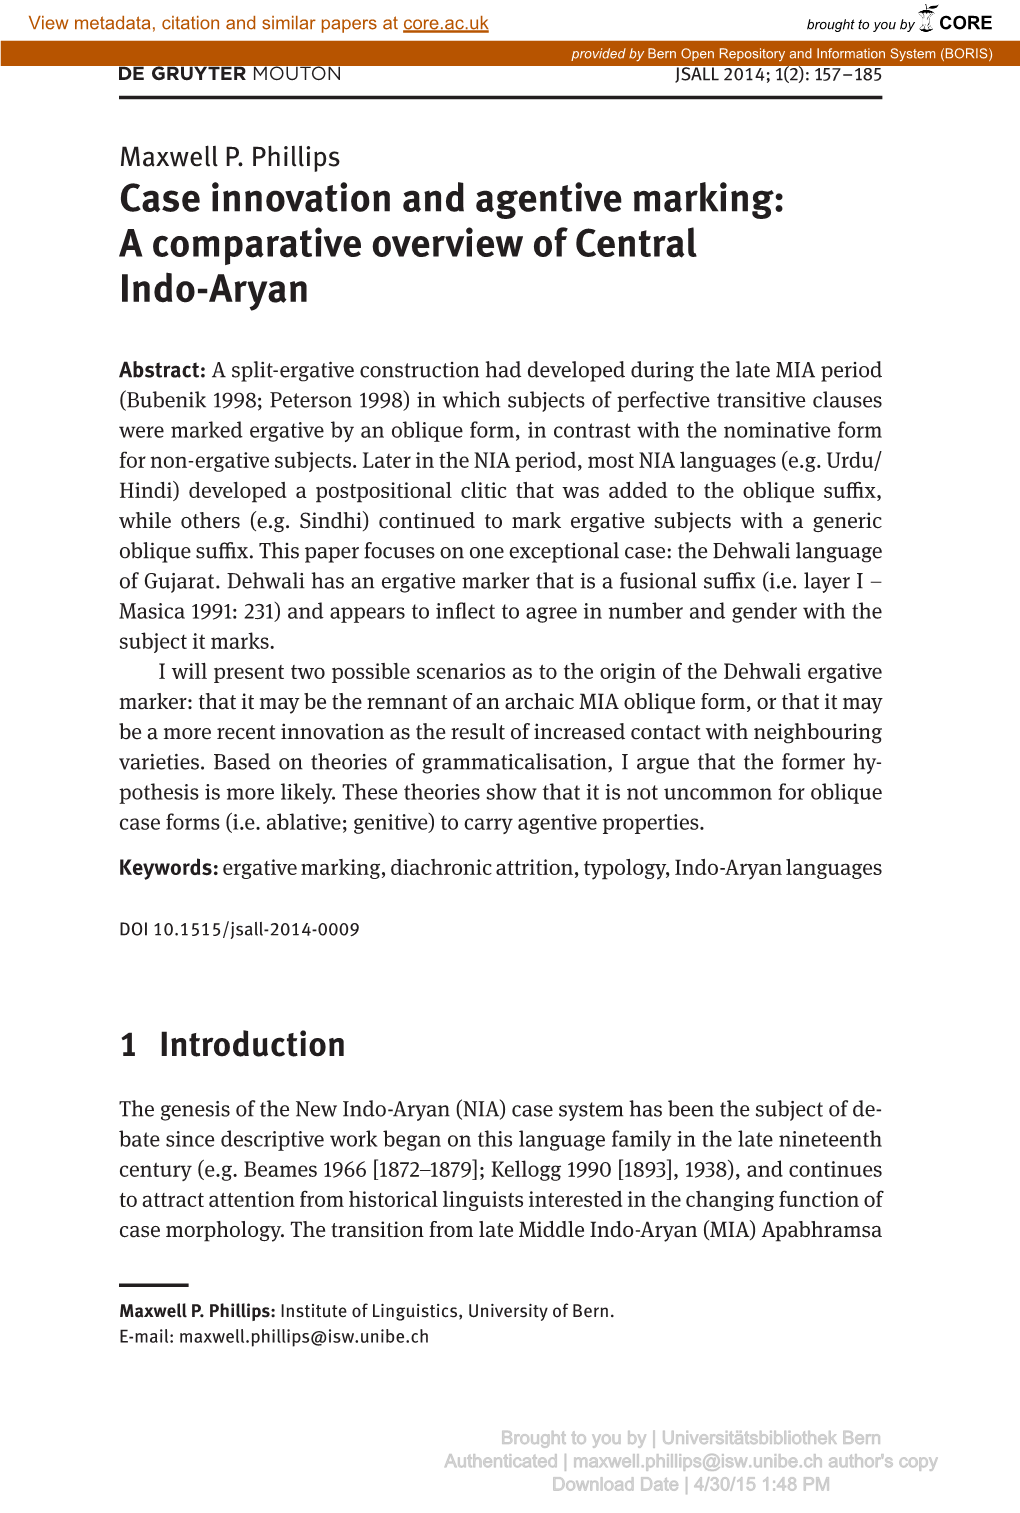 Case Innovation and Agentive Marking: a Comparative Overview of Central Indo-Aryan